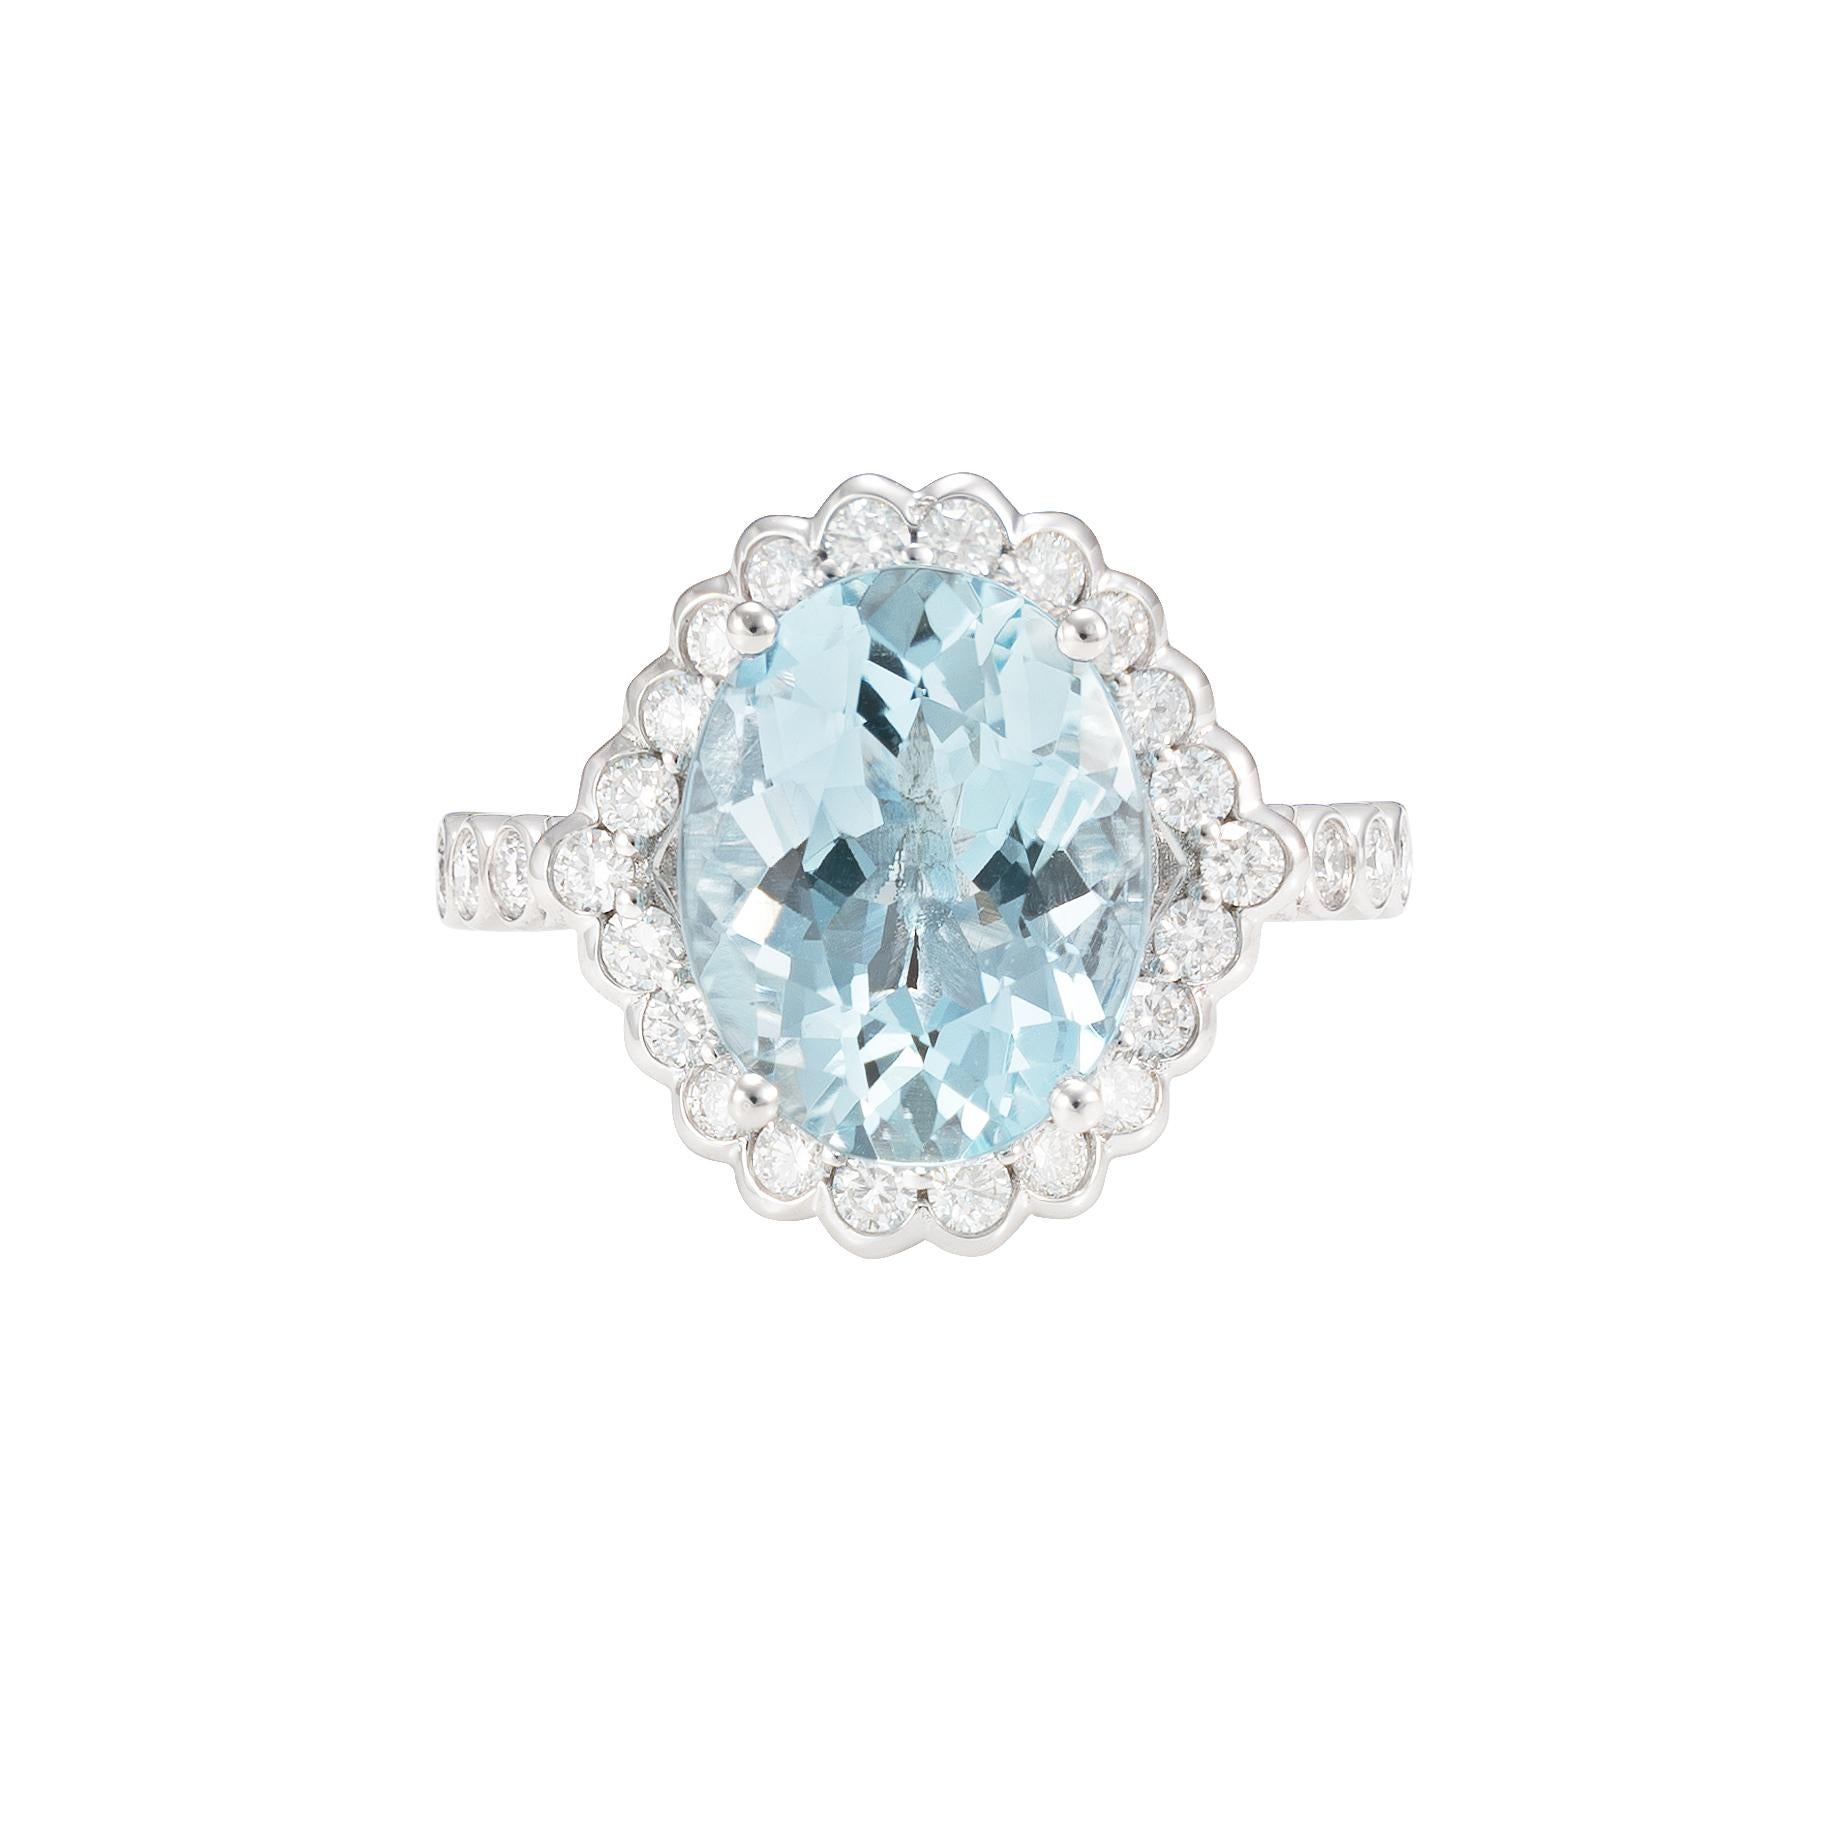 Oval Cut 4.5 Carat Aquamarine and Diamond Ring in 18 Karat White Gold For Sale